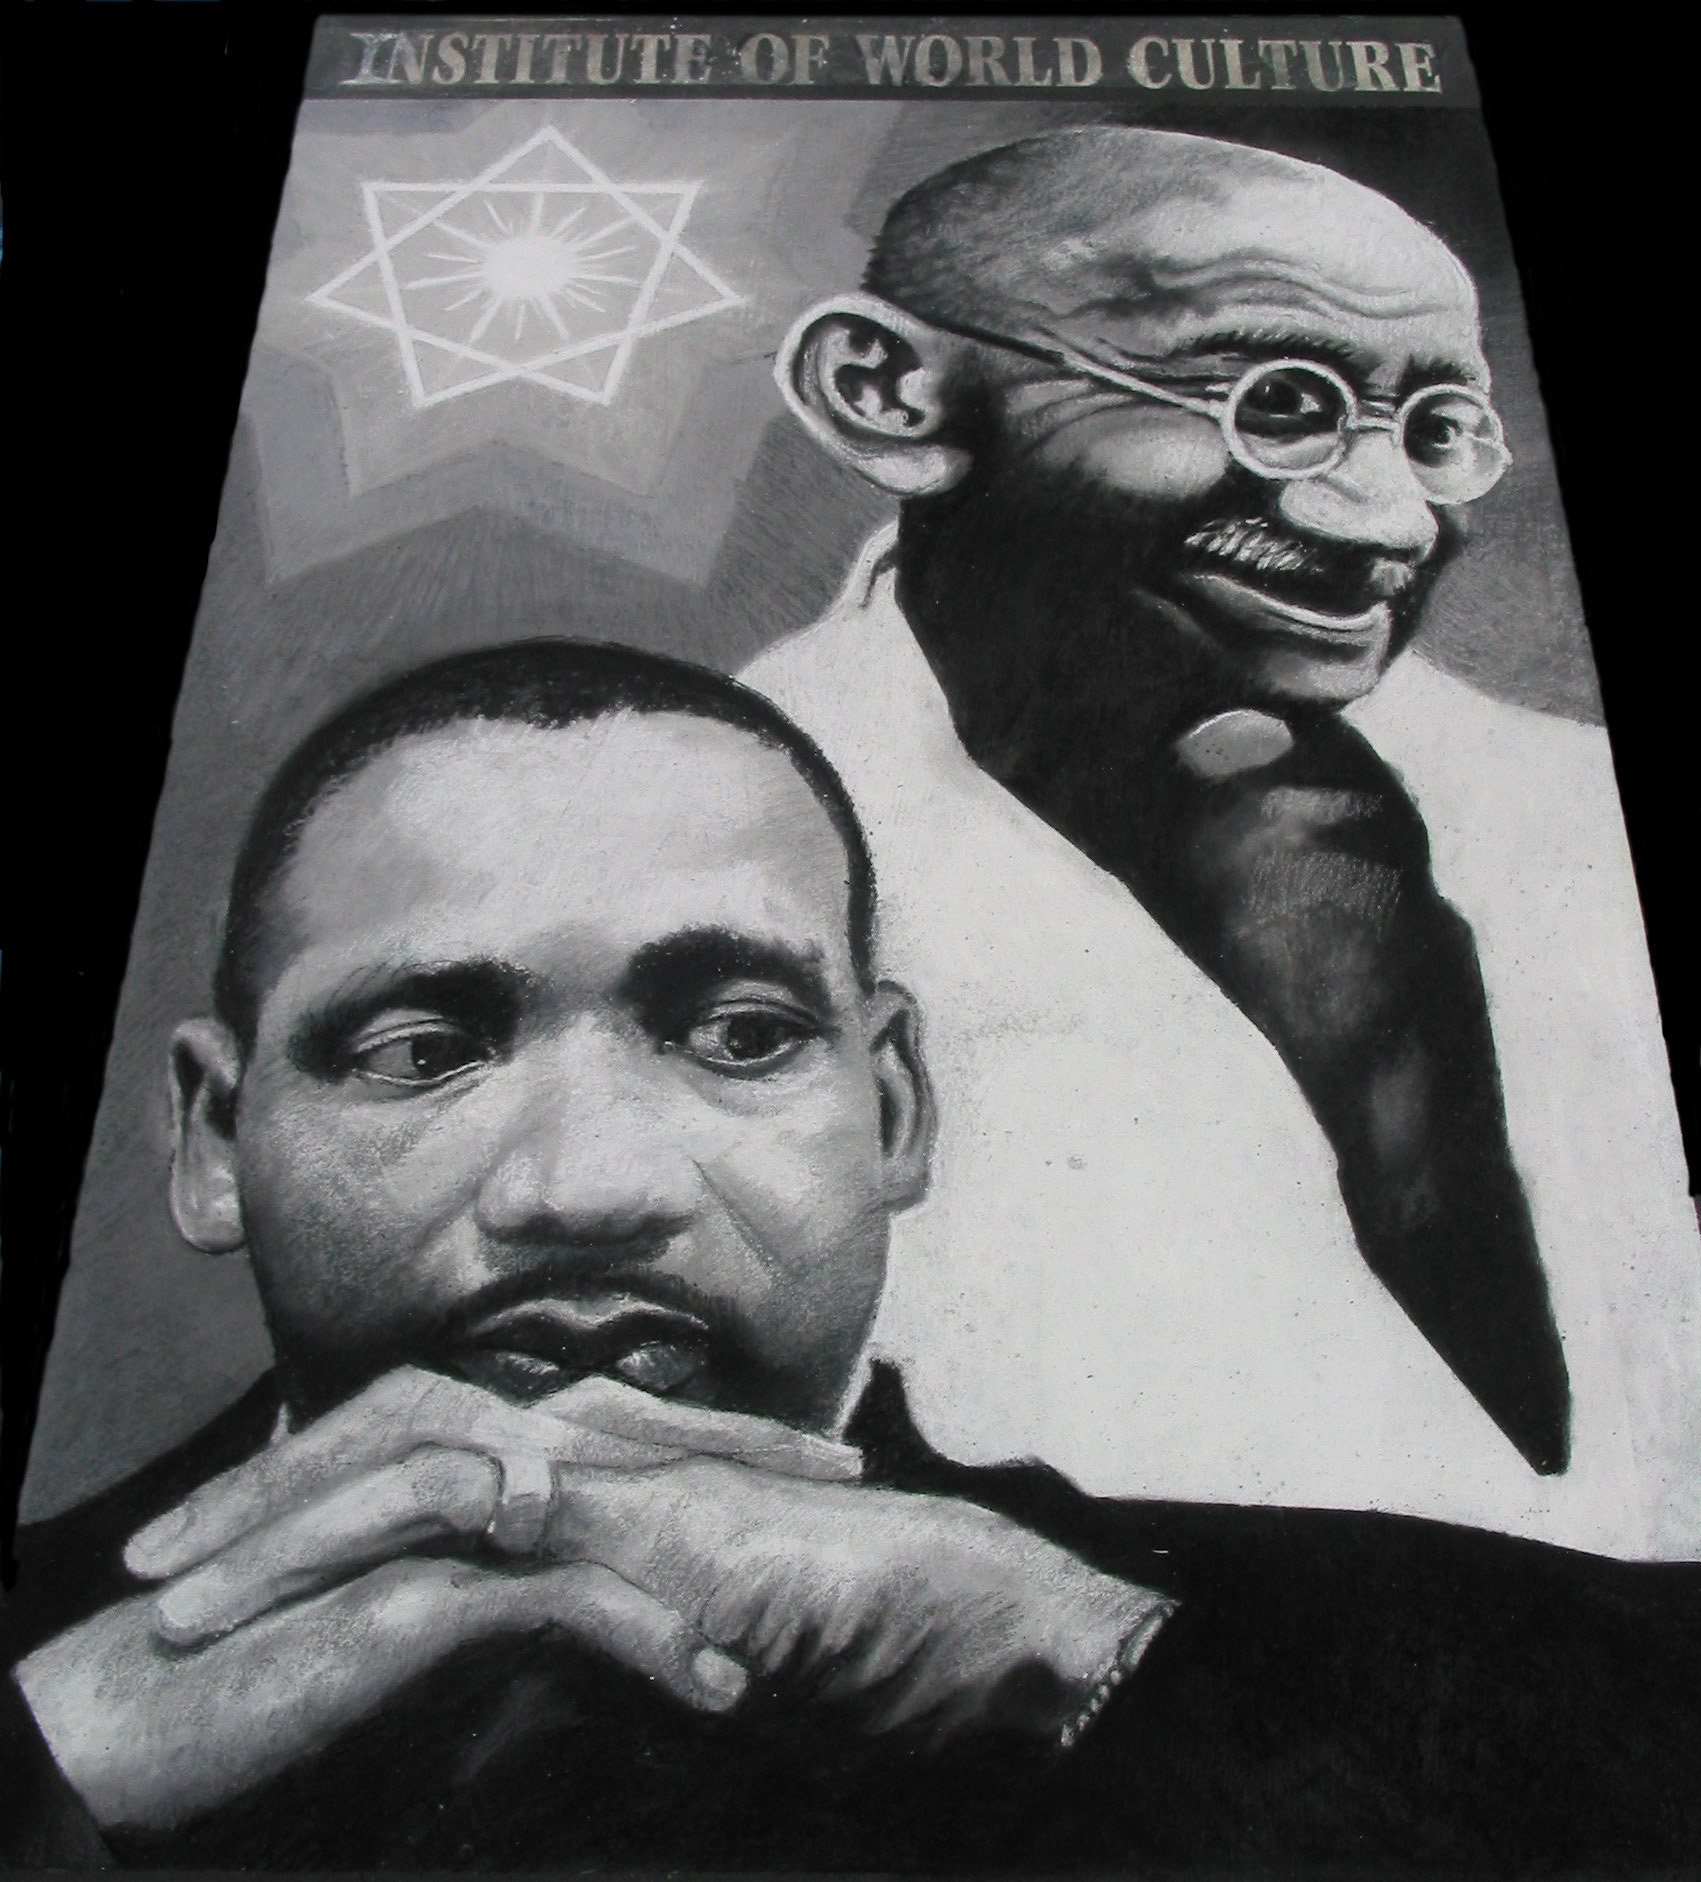 Chalk painting of Mahatma Gandhi and Martin Luther King, Jr.